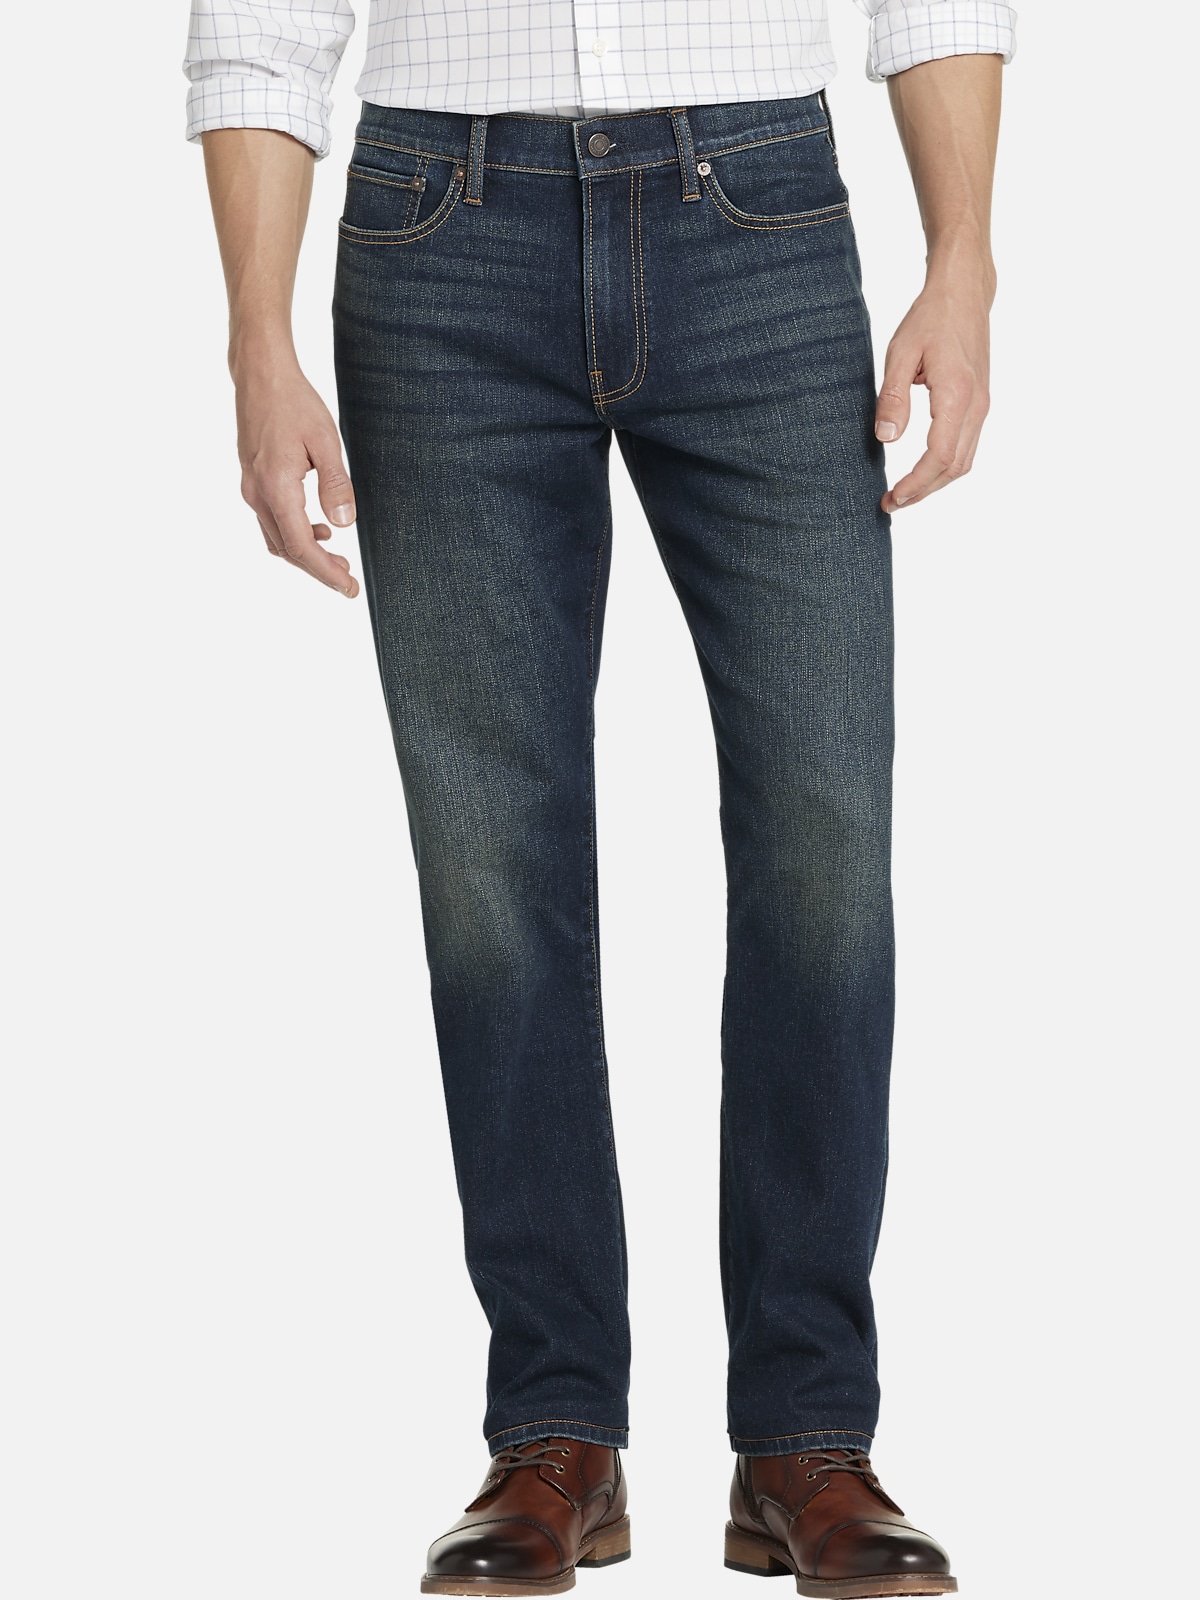 https://image.menswearhouse.com/is/image/TMW/TMW_22ZE_53_LUCKY_BRAND_JEANS_DARK_WASH_MAIN?imPolicy=pdp-zoom-mob